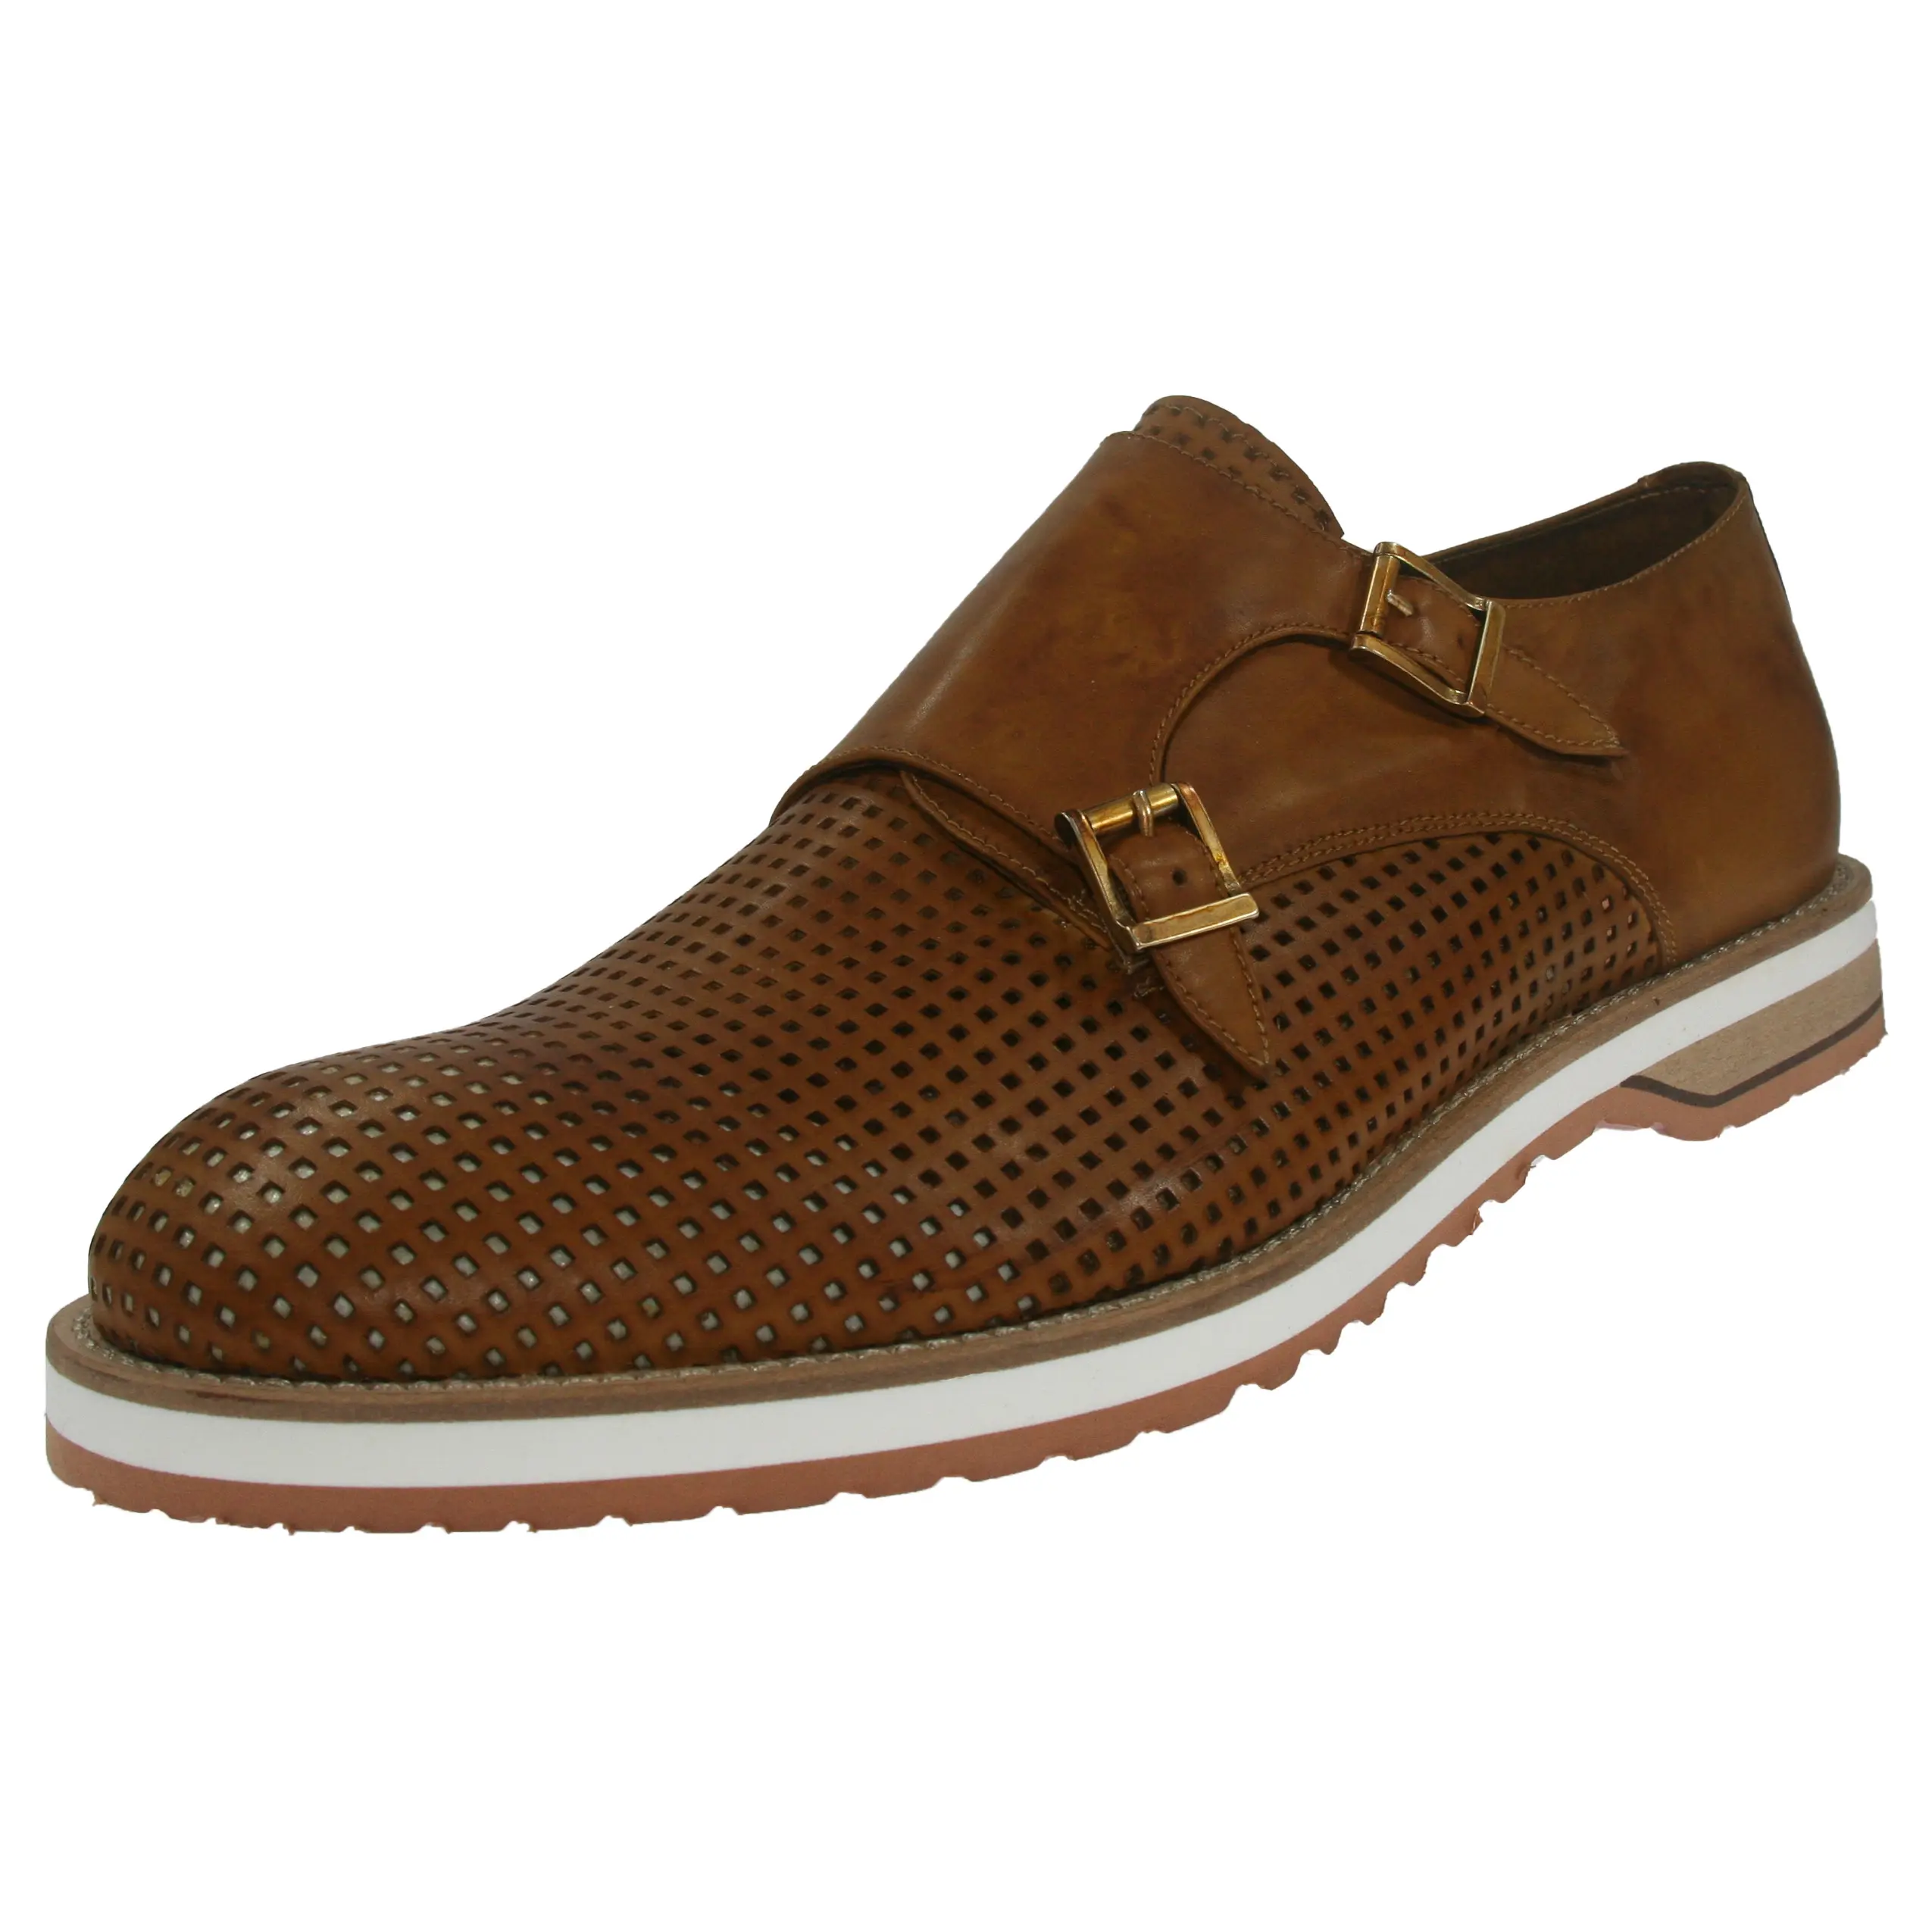 Men's casual double buckle shoe in fine leather-colored perforated calfskin handmade in Italy with vibram sole